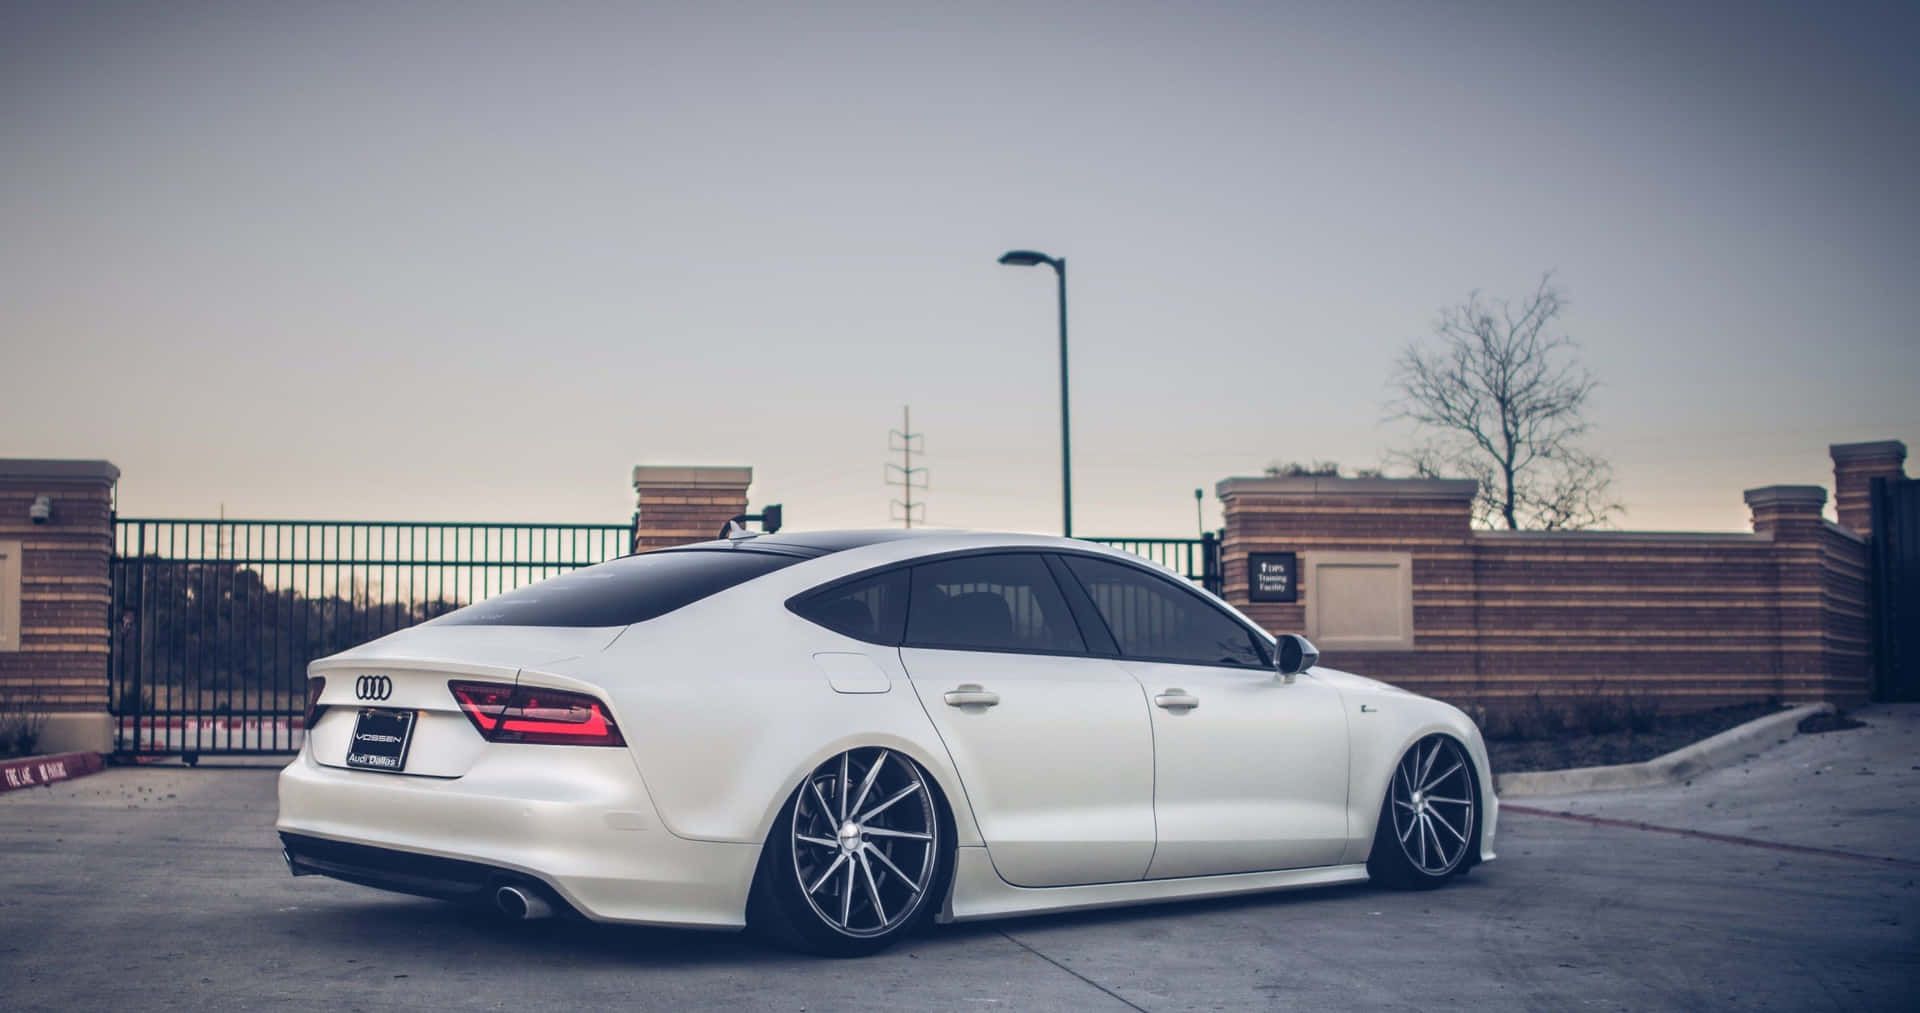 Sleek and Stylish Audi S7 in Motion Wallpaper